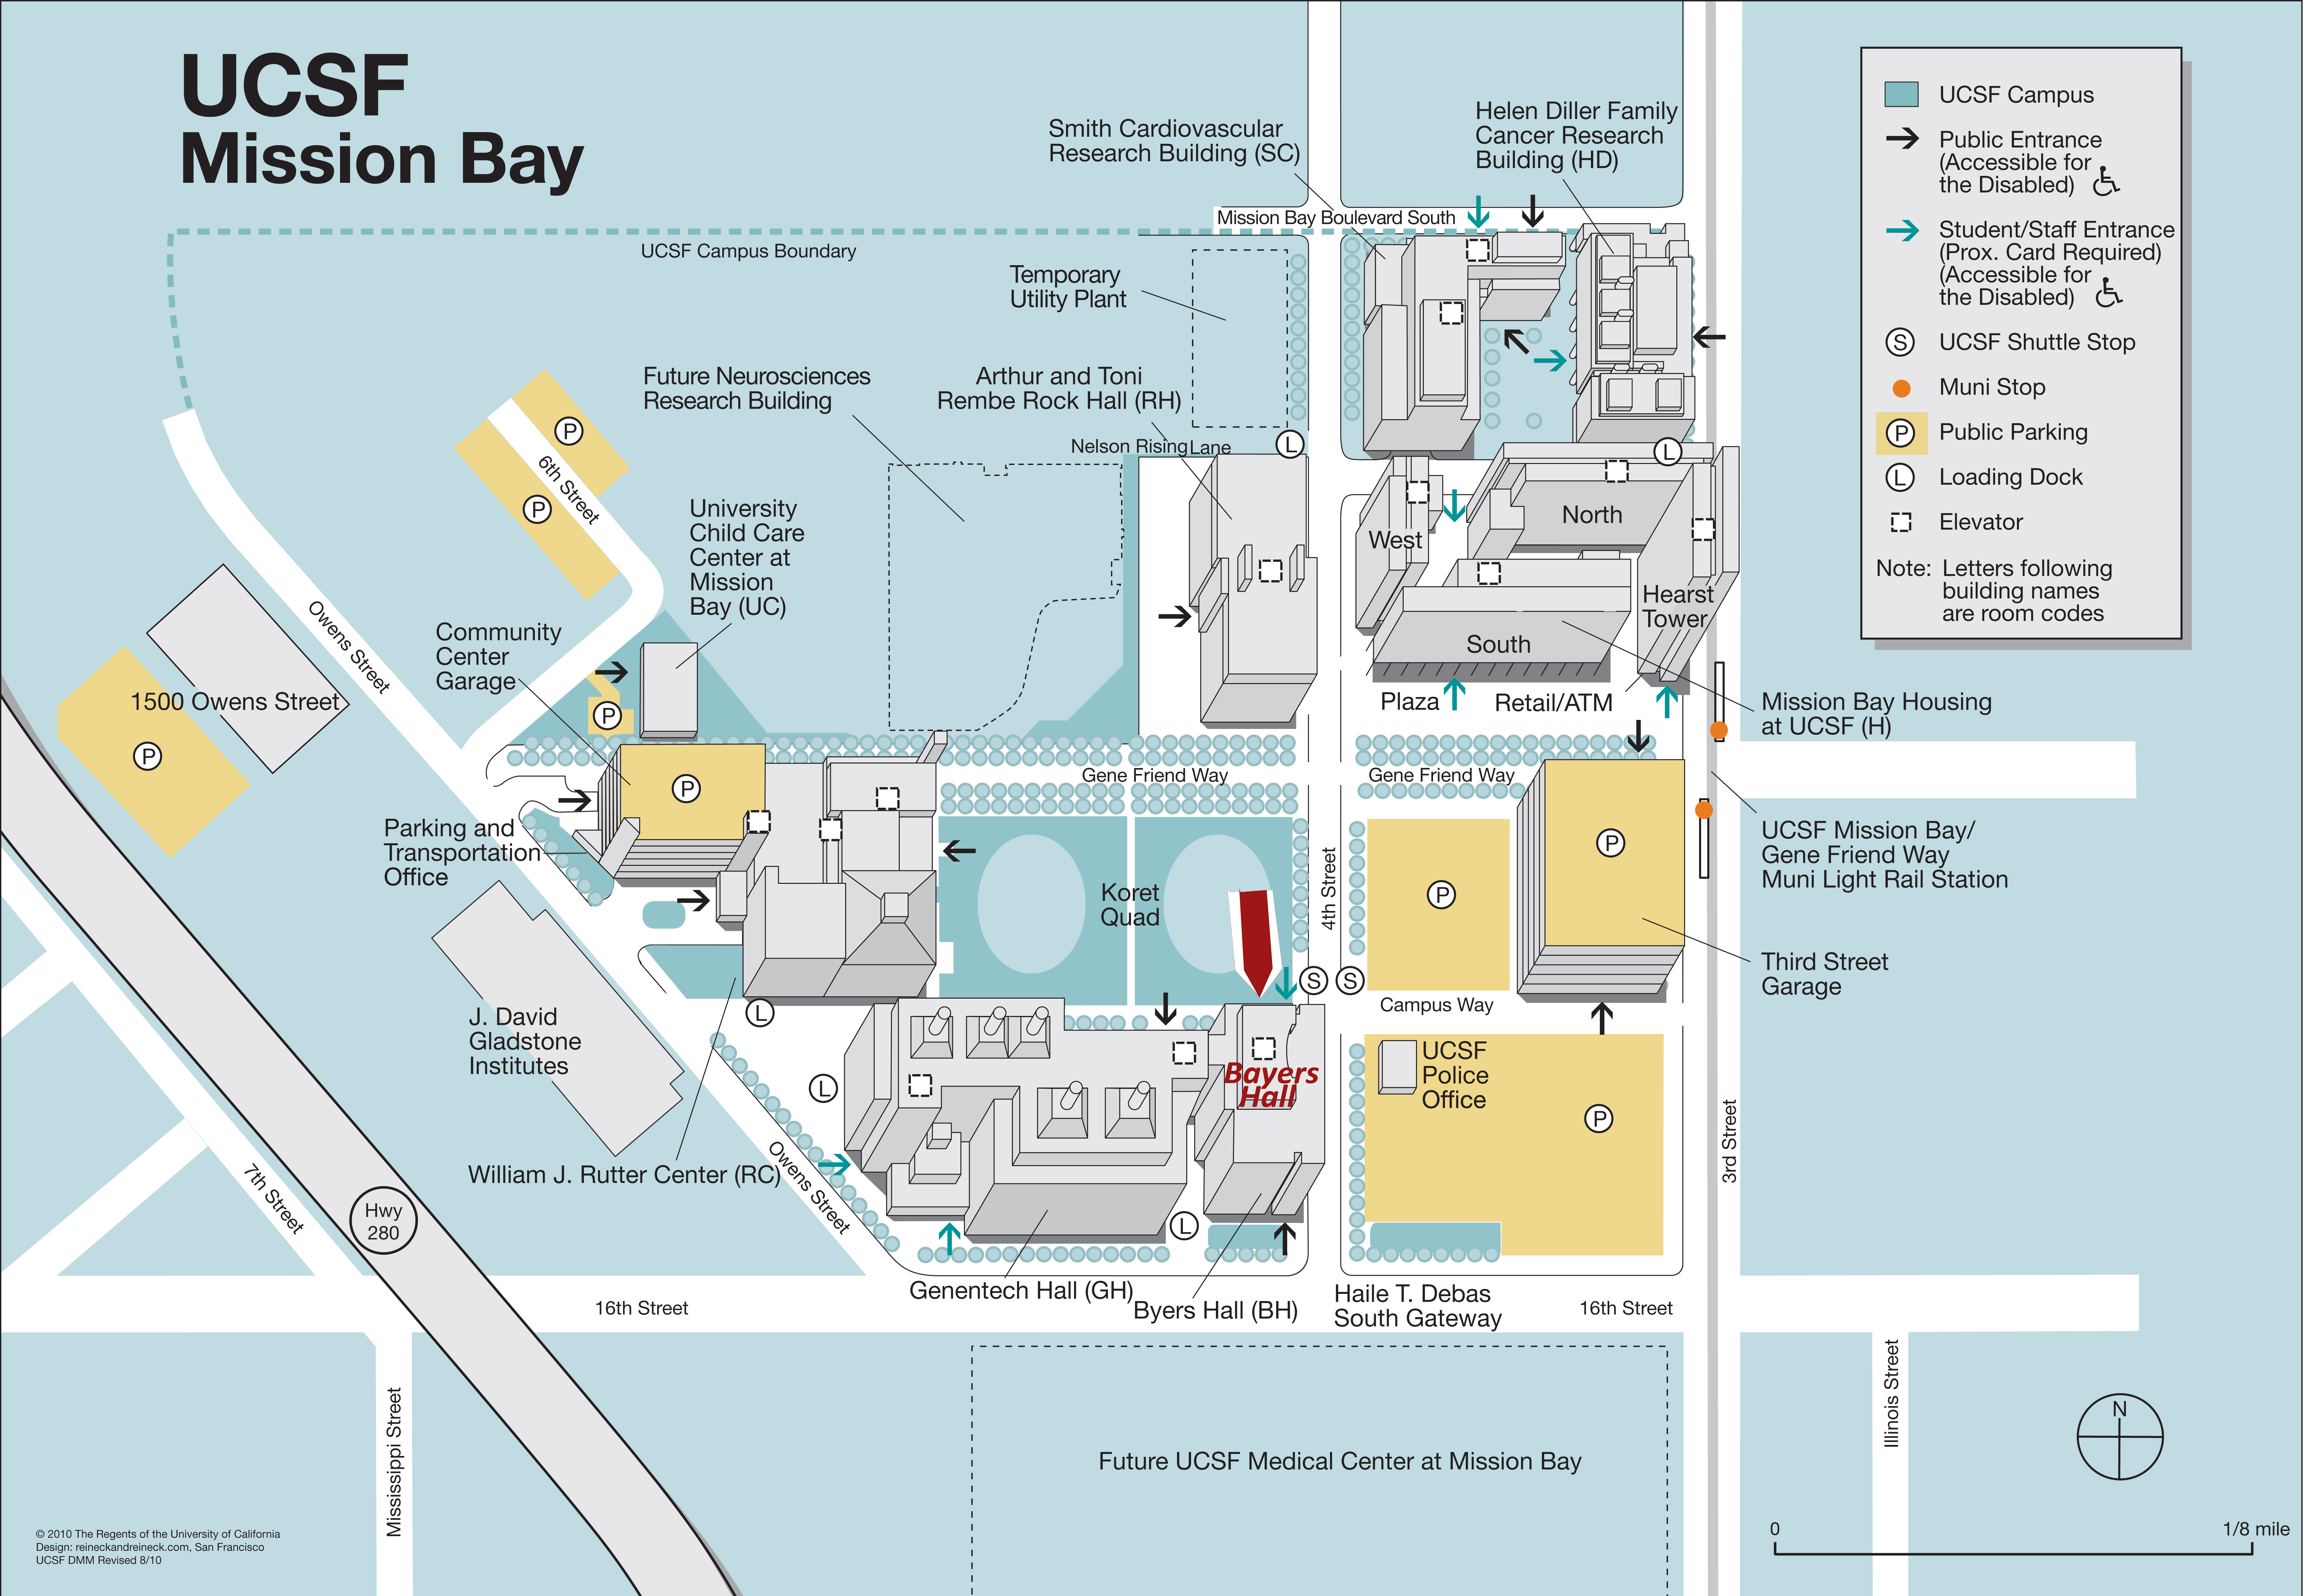 see Campus Map.